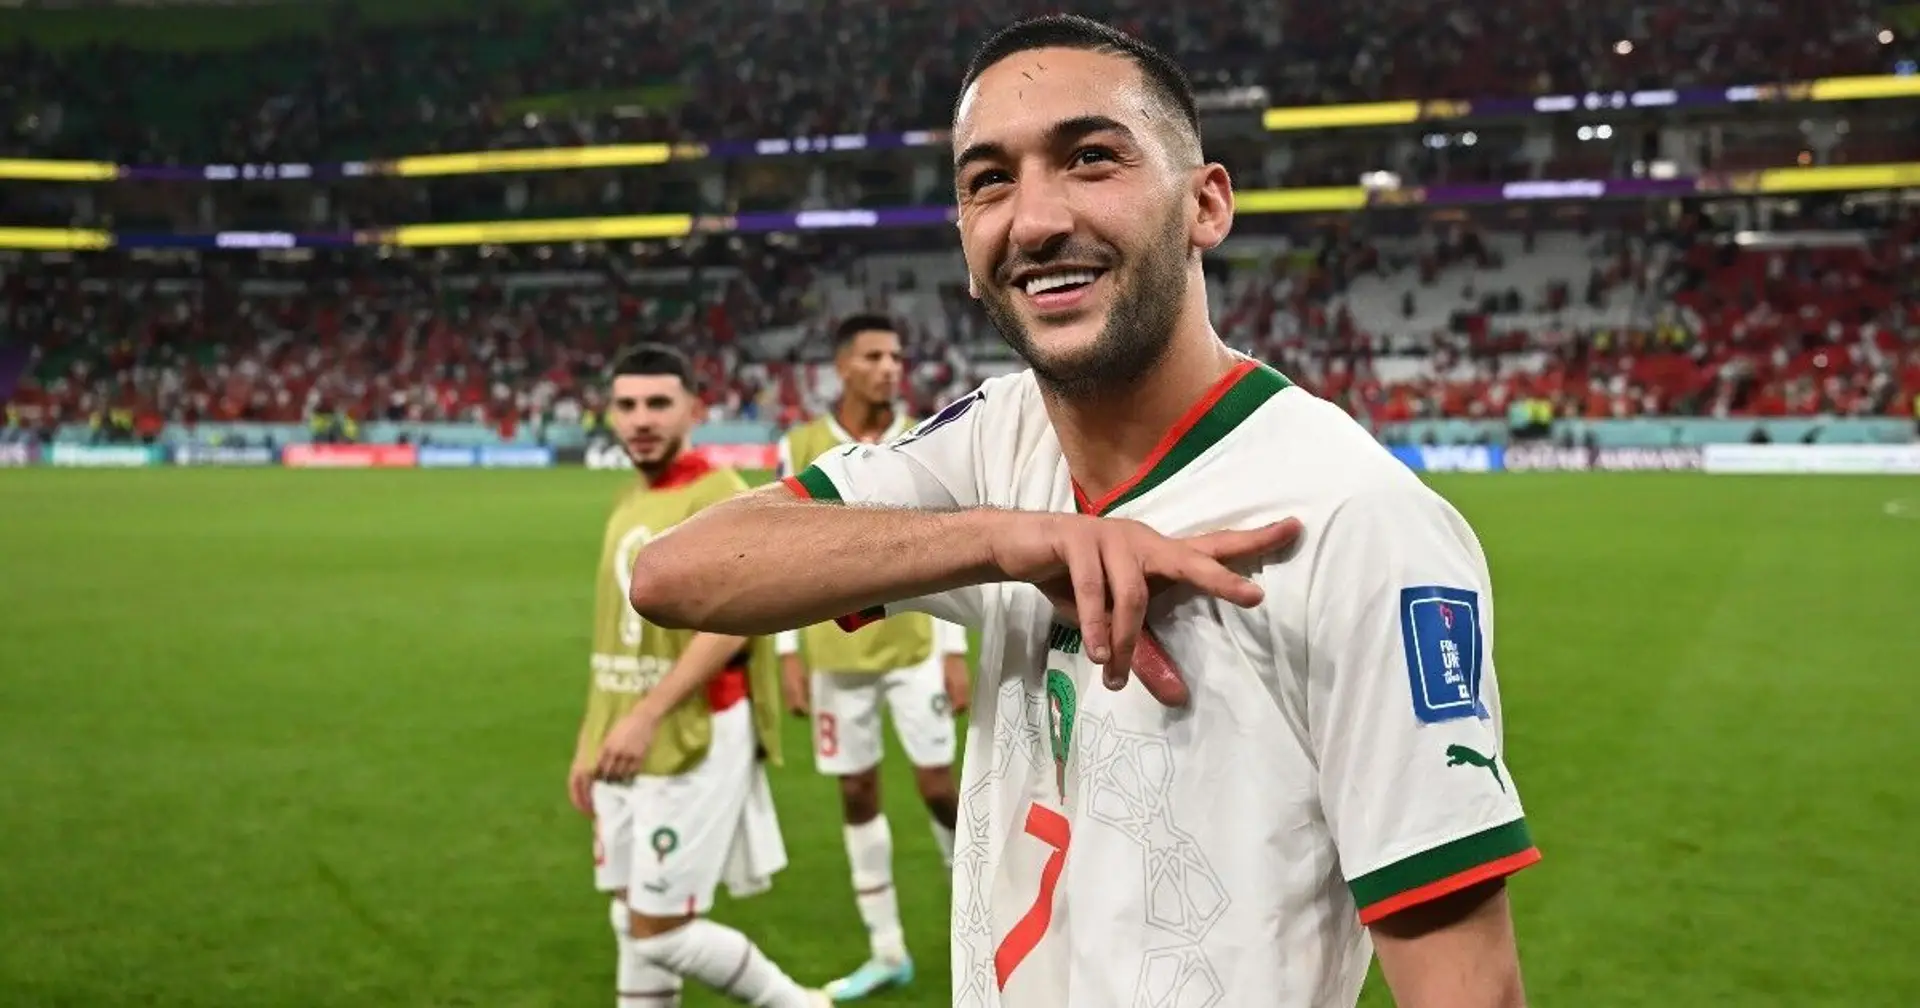 Hakim Ziyech leads African nation to World Cup semifinal for first time in history